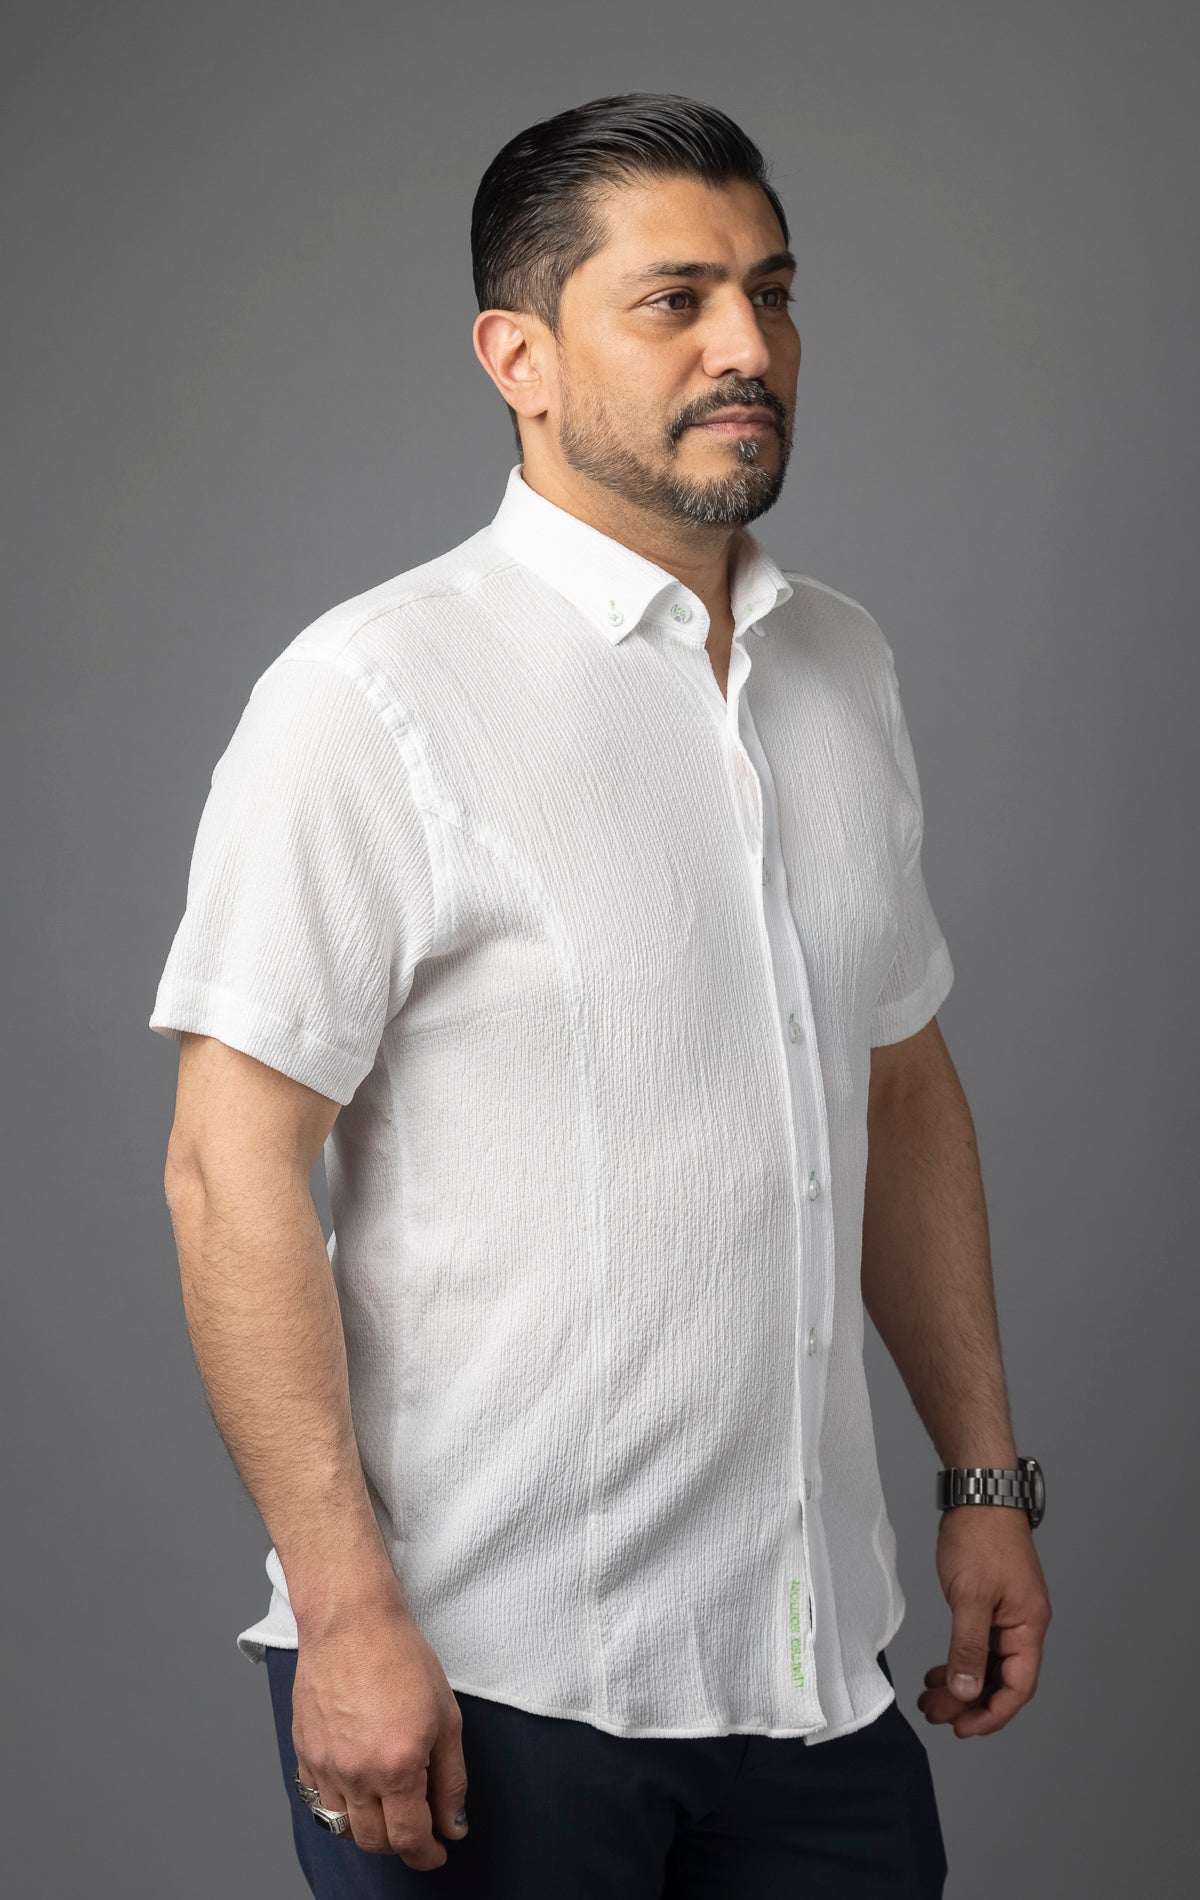 Casual button-up short sleeve shirt. Relaxed fit.